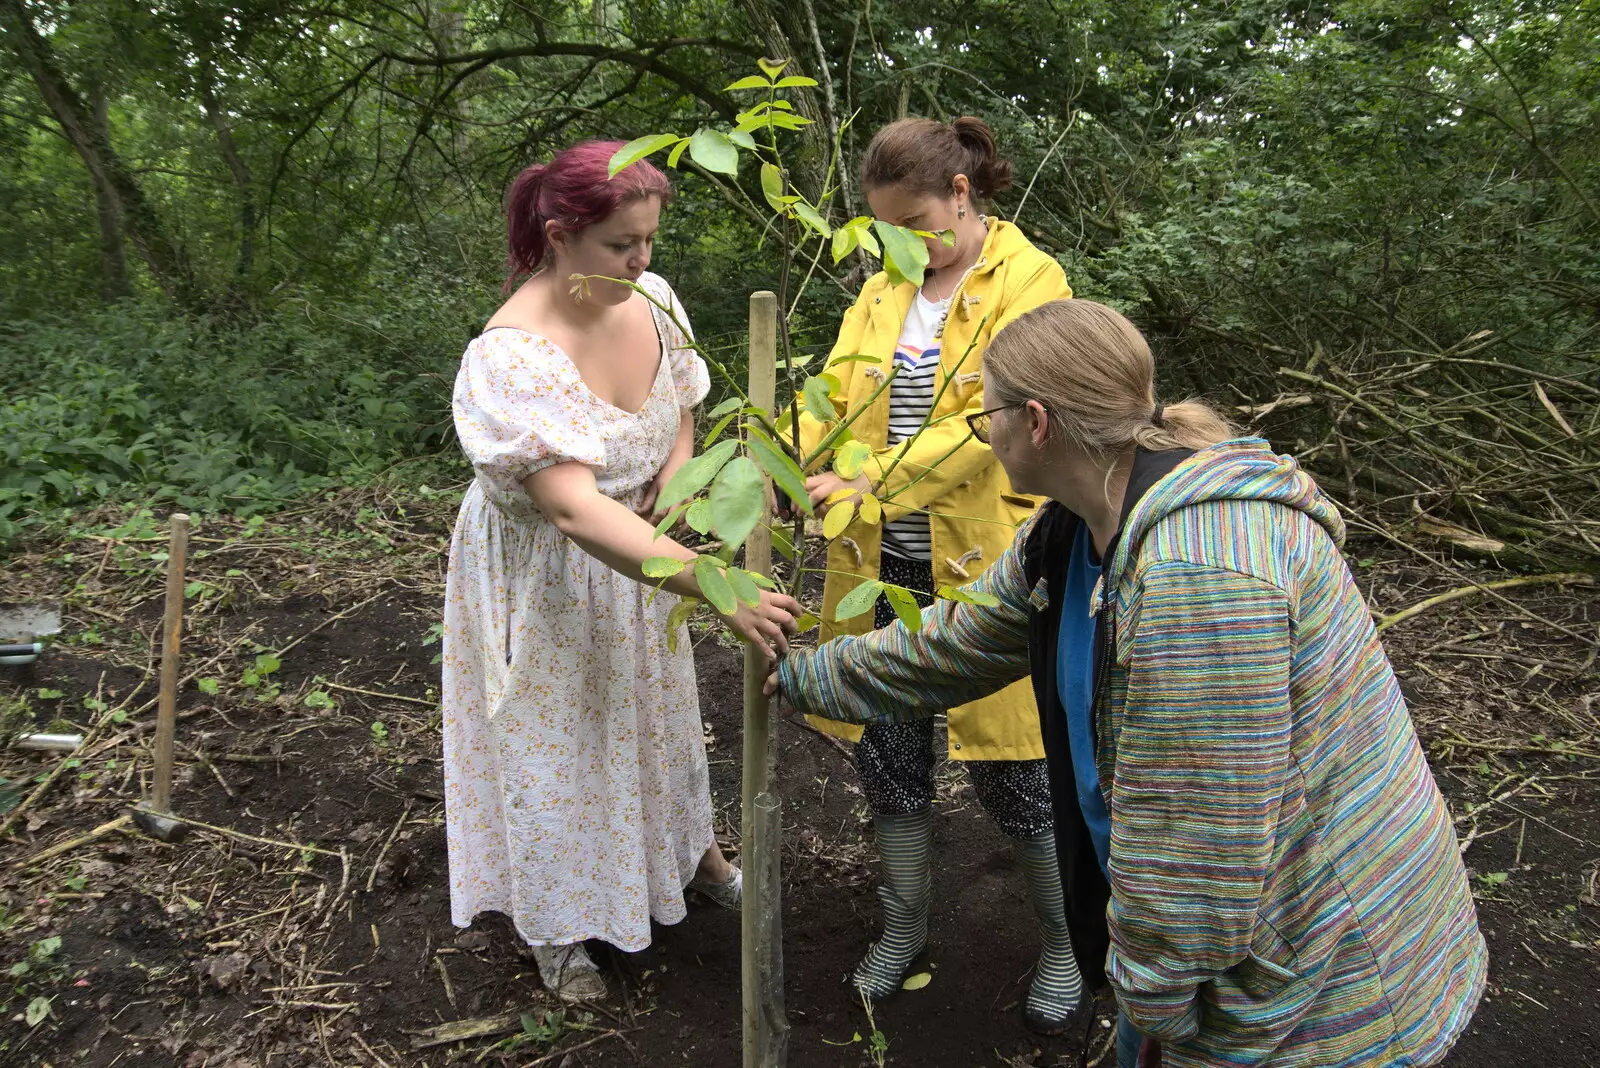 The stake is in and the walnut is tied up, from Planting a Tree, Town Moors, Eye, Suffolk - 10th July 2021